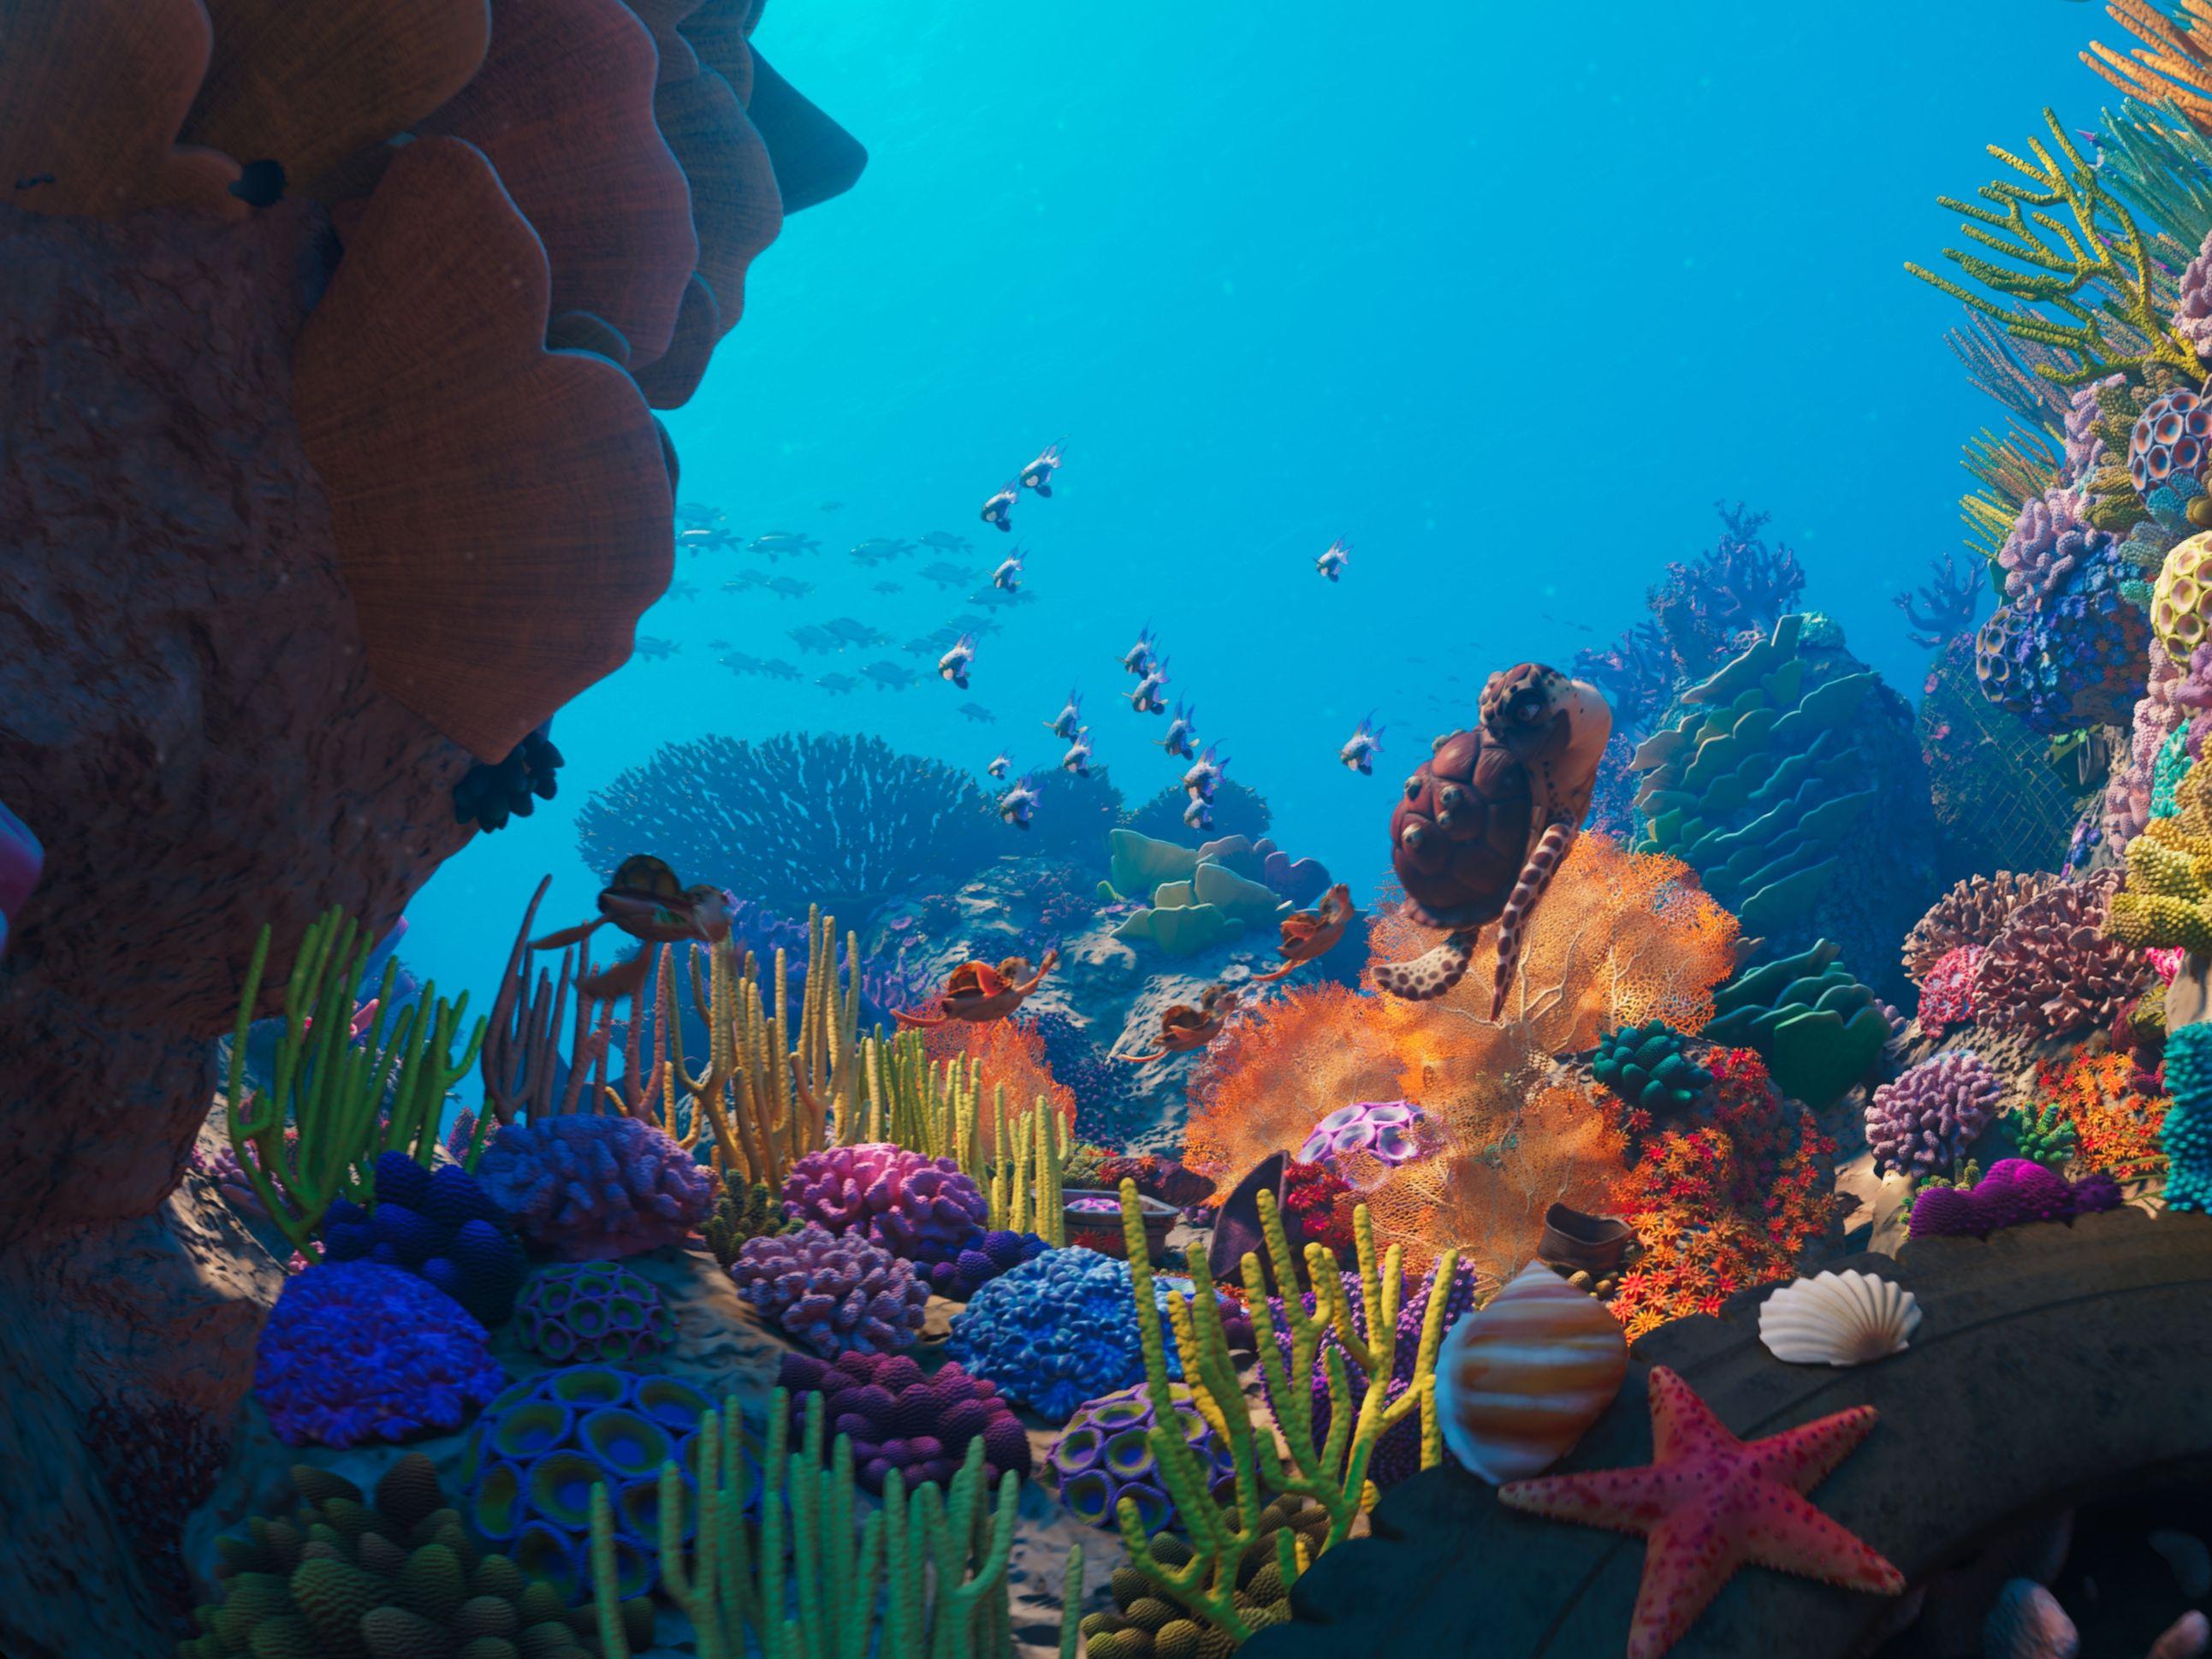 The Hong Kong Space Museum will screen a new 3D dome show, "Legend of the Enchanted Reef 3D", at its Space Theatre starting October 1 (Sunday) to lead audiences to explore the underwater world. Picture shows a vibrant coral reef serving as the habitat for numerous marine organisms. (Source of photo: SOFTMACHINE)